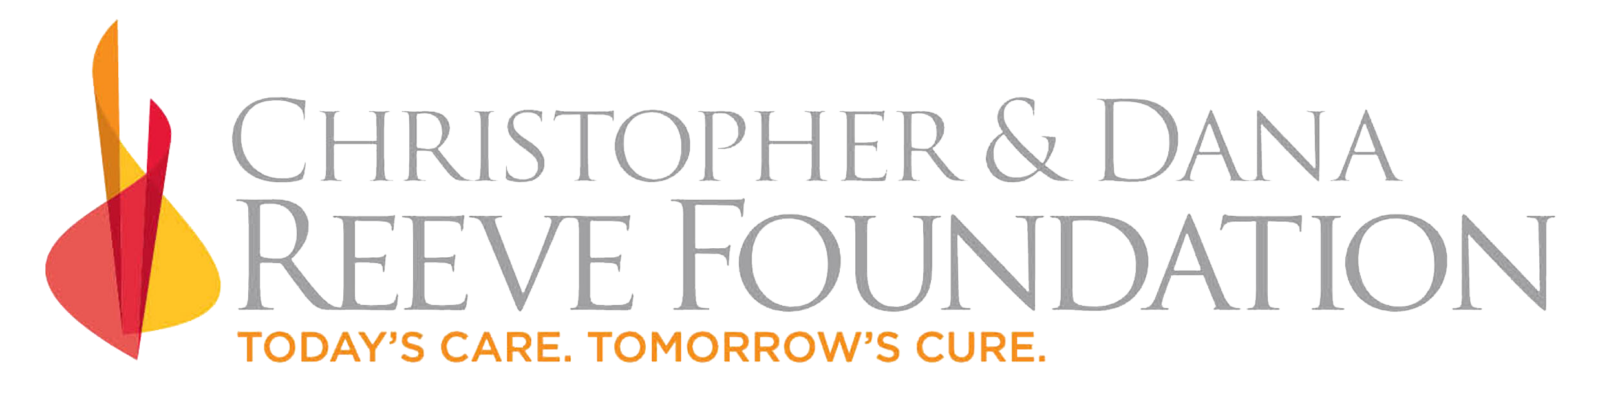 Logo for the Christopher & Dana Reeve Foundation